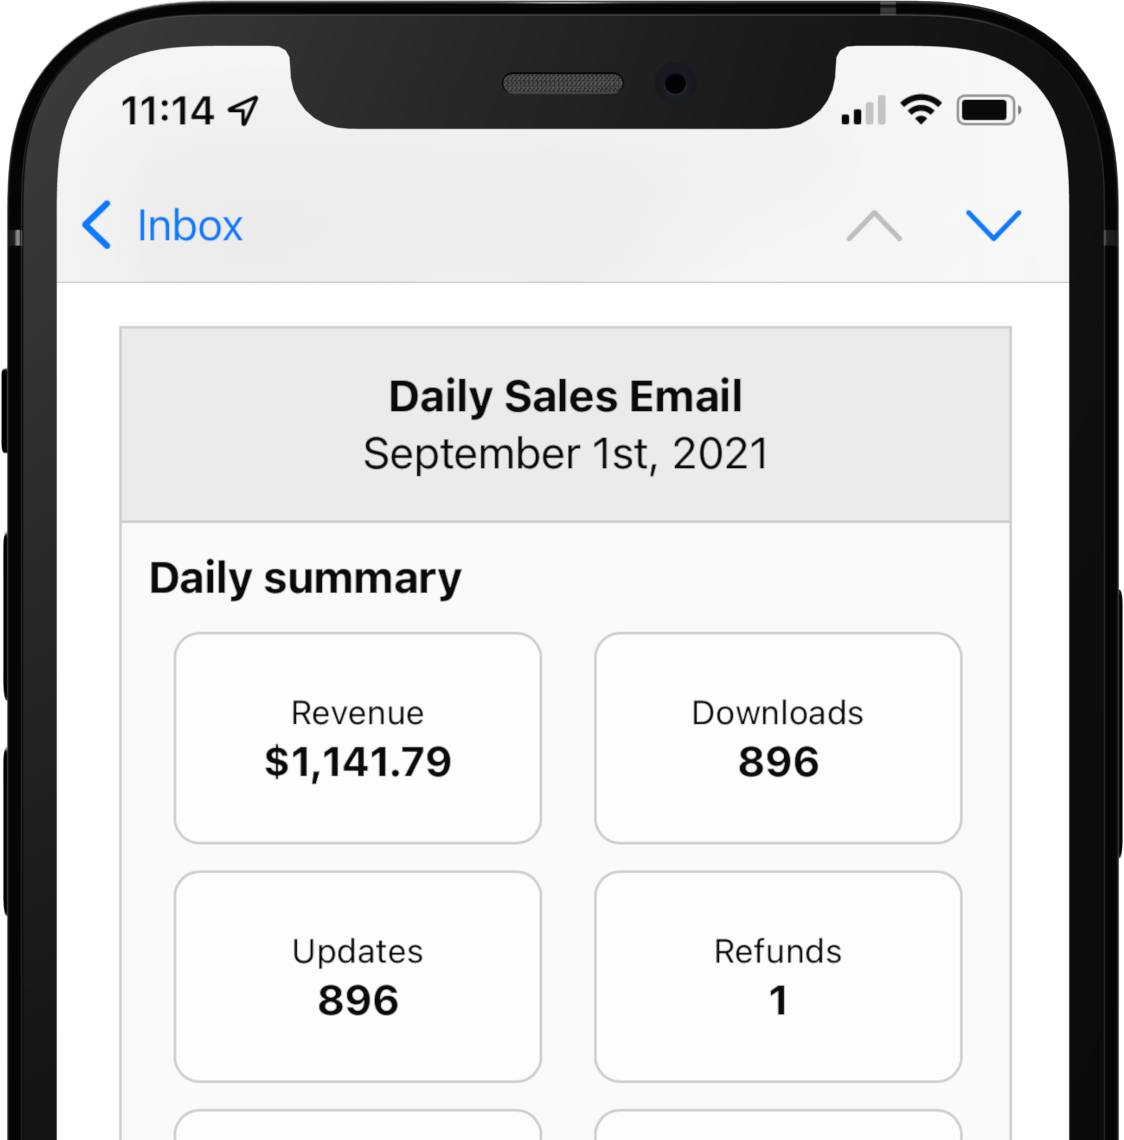 Daily Sales Email